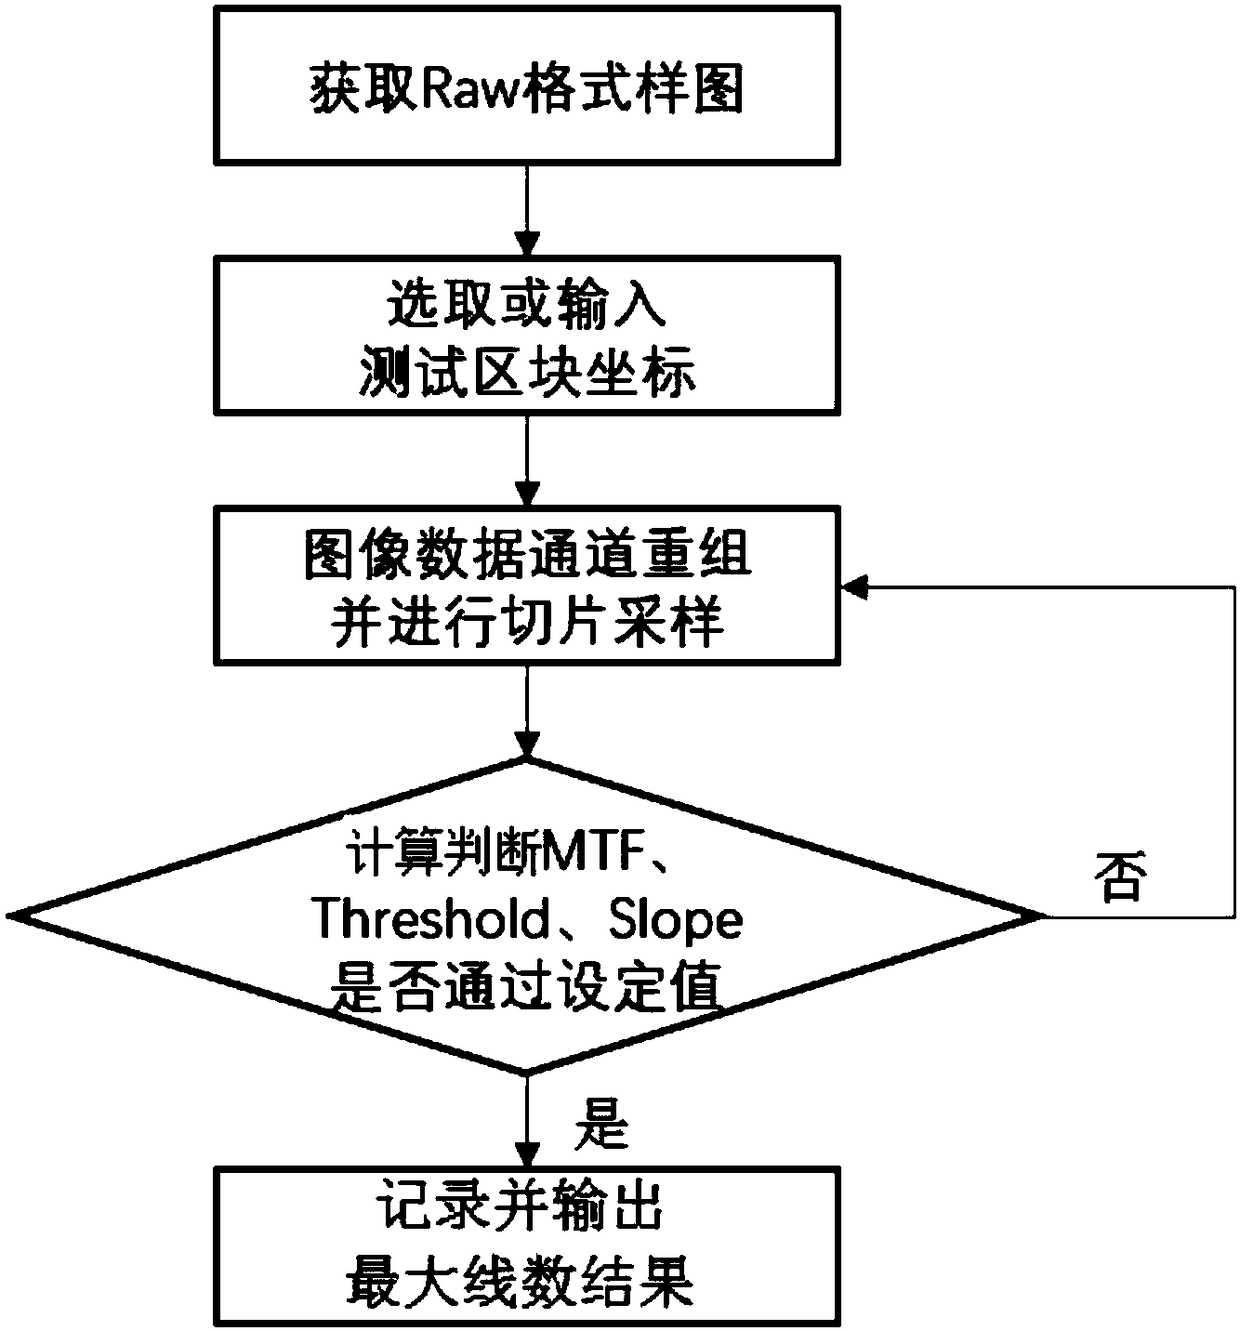 Resolution power test method and system based on ISO12233